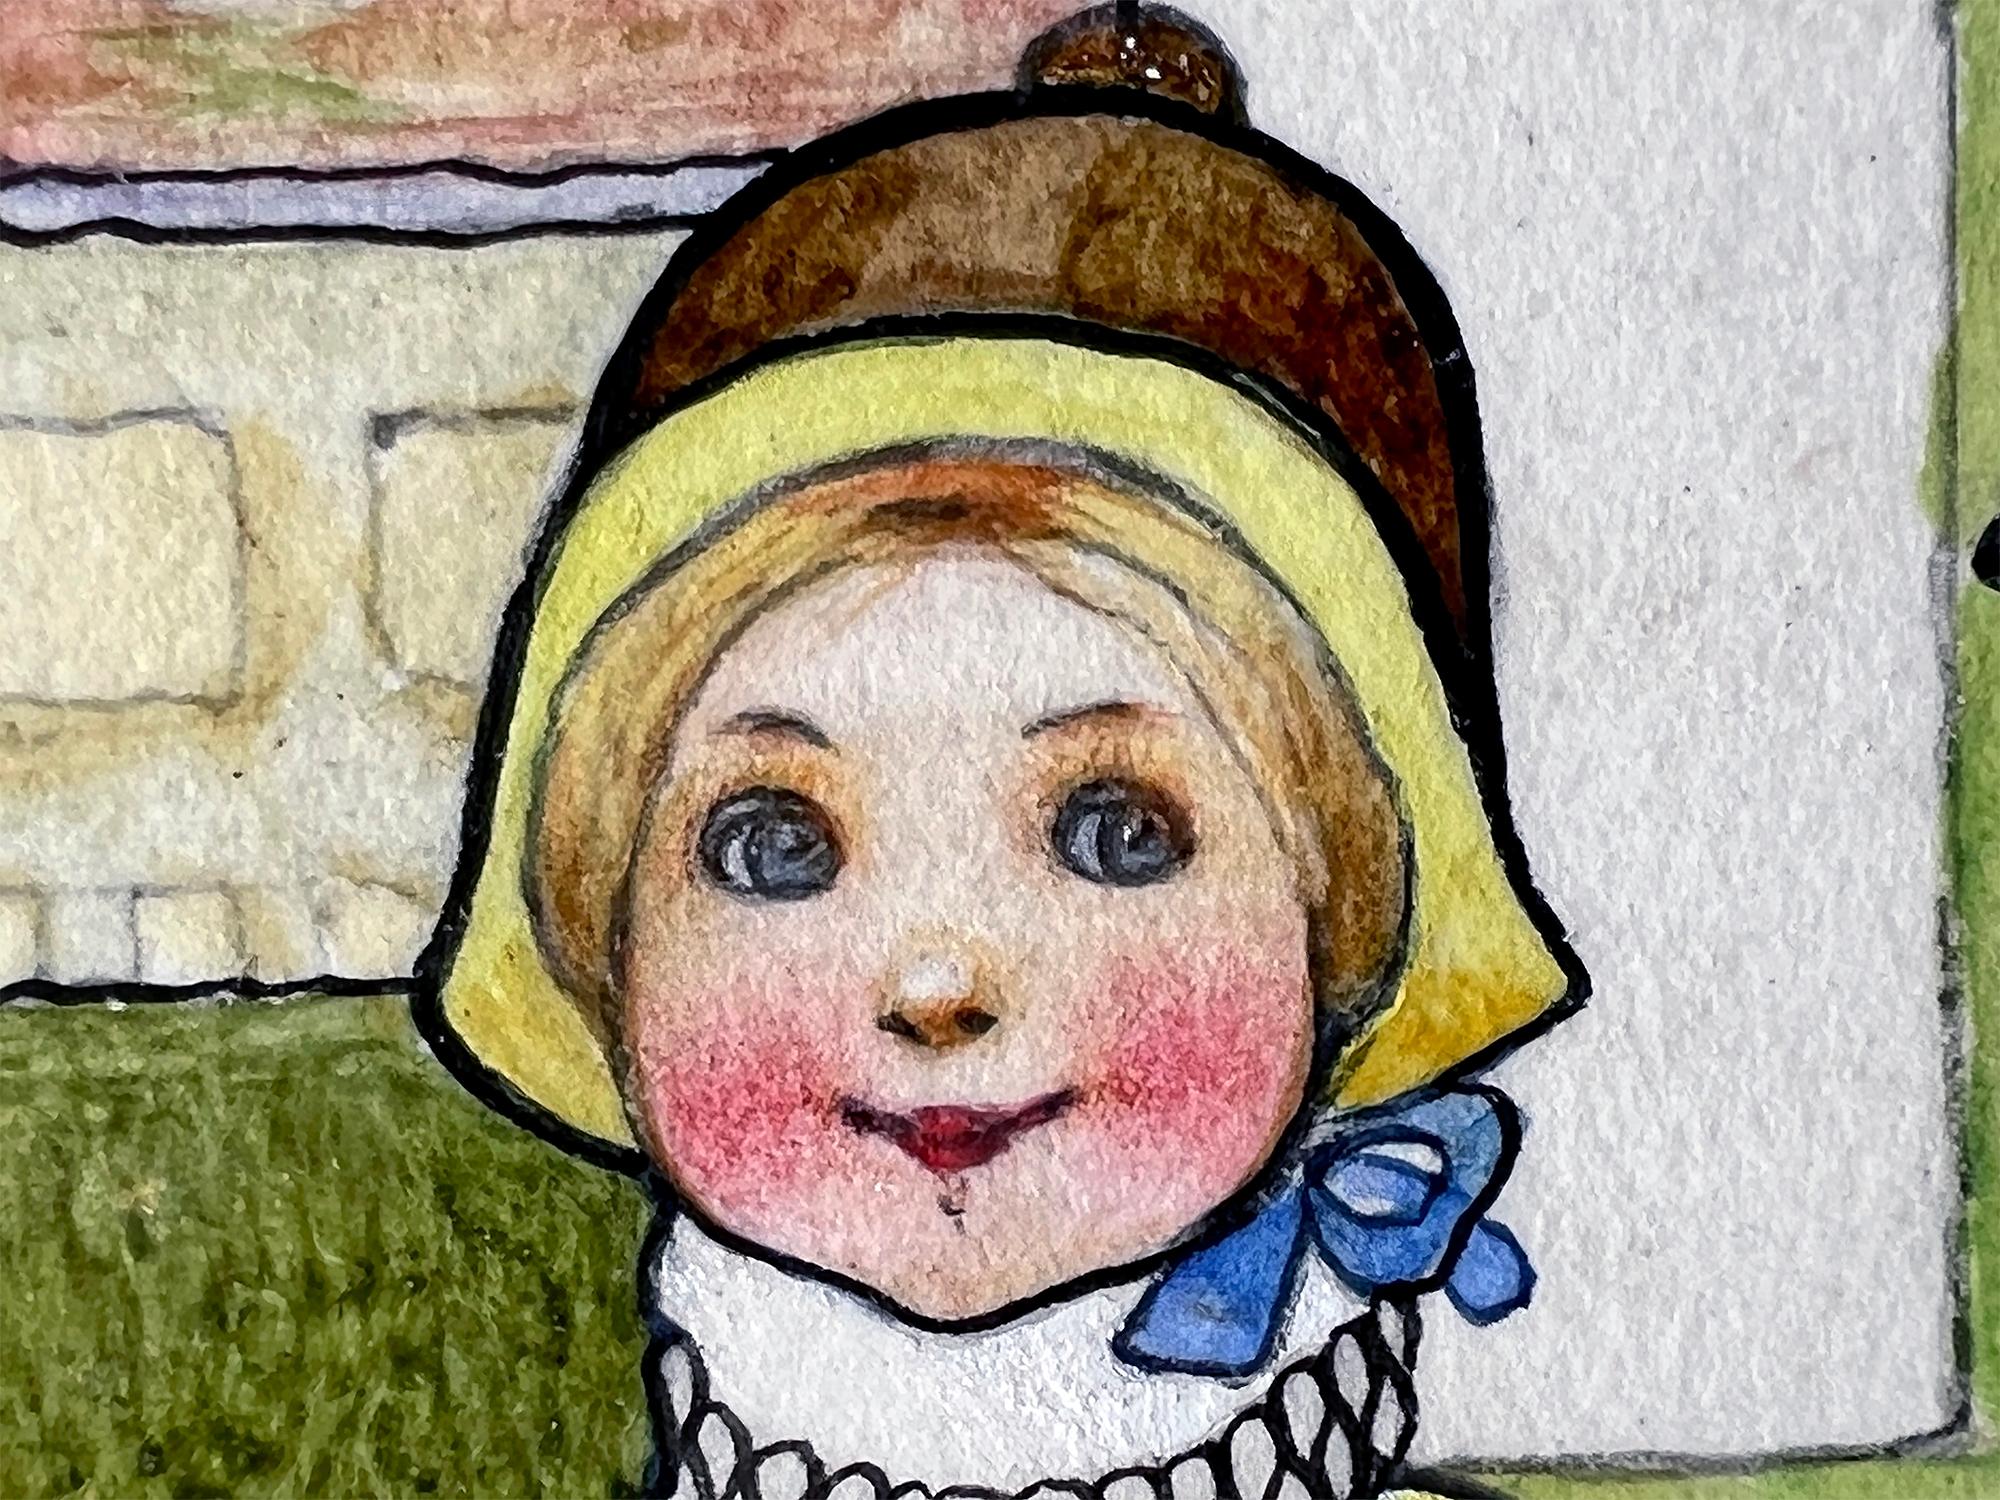 Three Children Book Illustration - Female Illustrator  - Turn of the Century  - Painting by Amy Millicent Sowerby